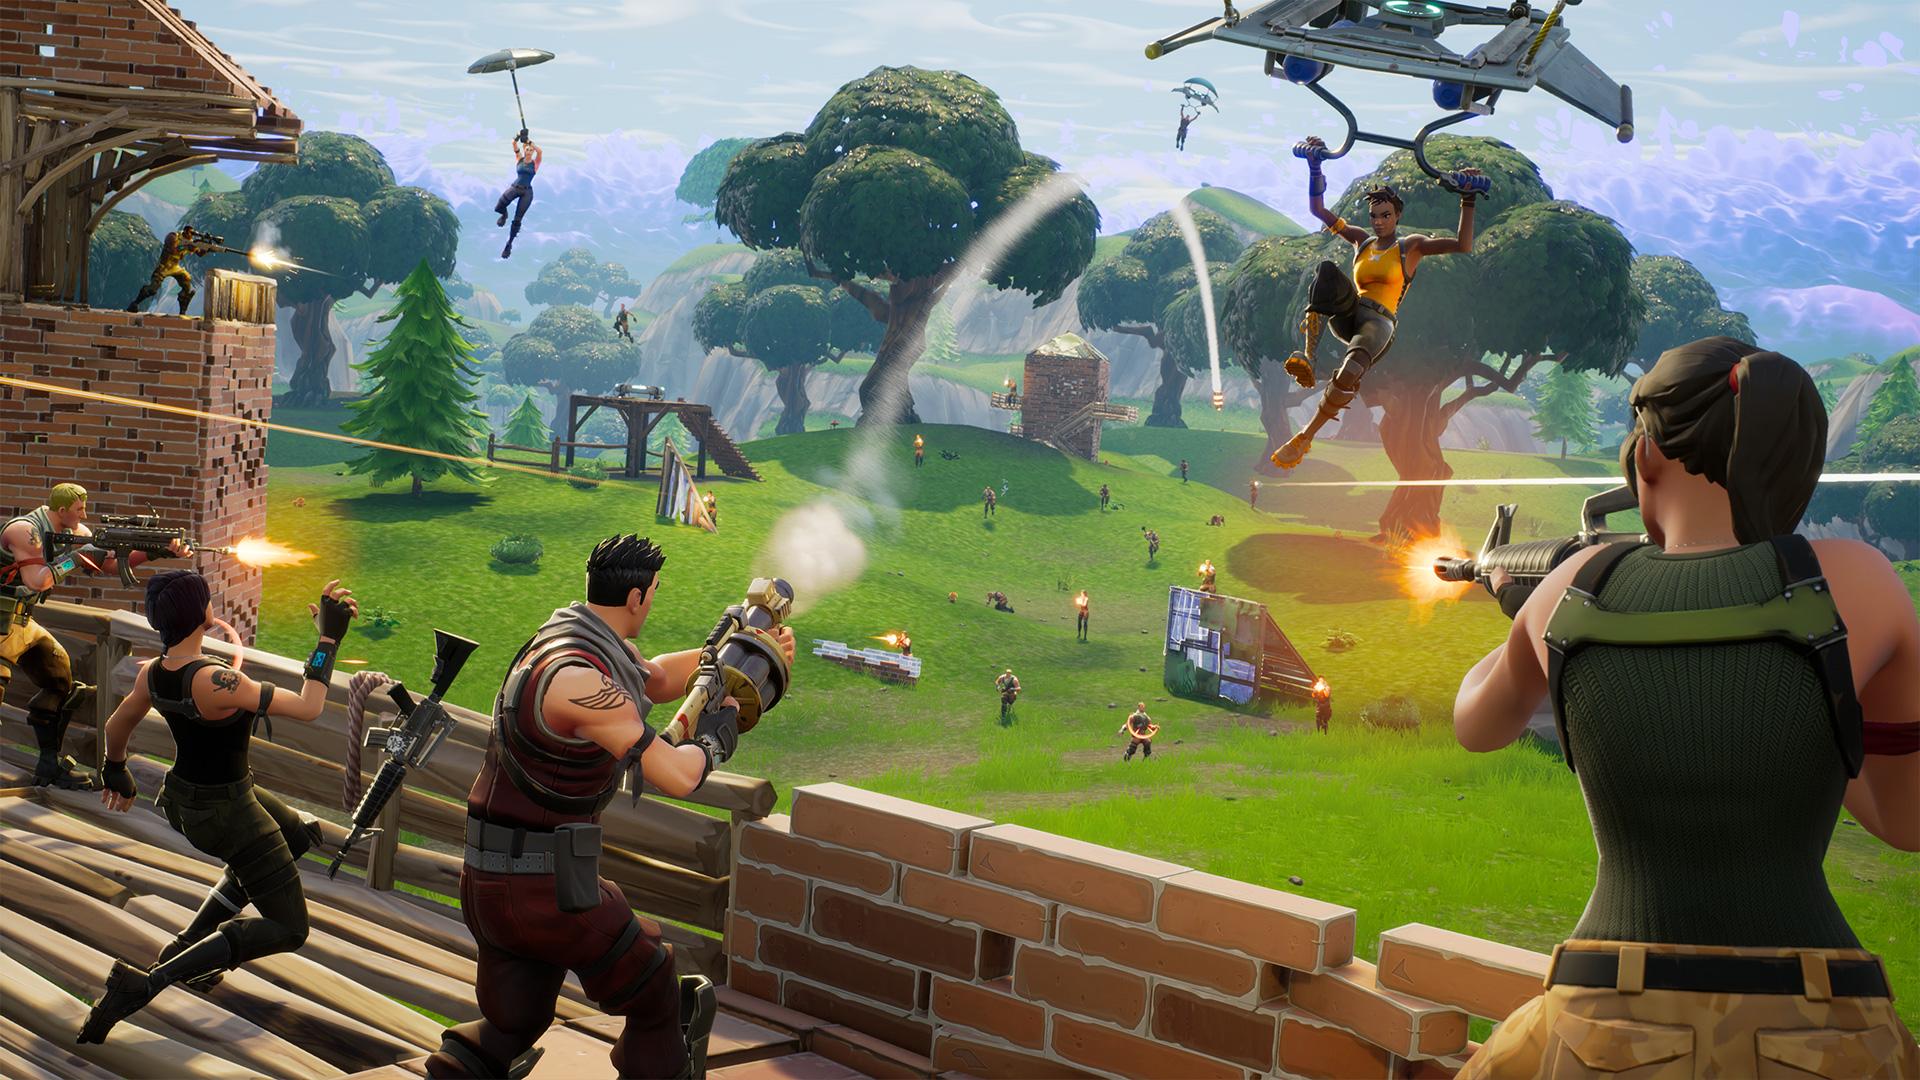 Fortnite Teases Avengers Endgame Crossover Yet Again - last year around the time of avengers infinity war s release fortnite introduced a limited time event that allowed players to wield the infinity gauntlet